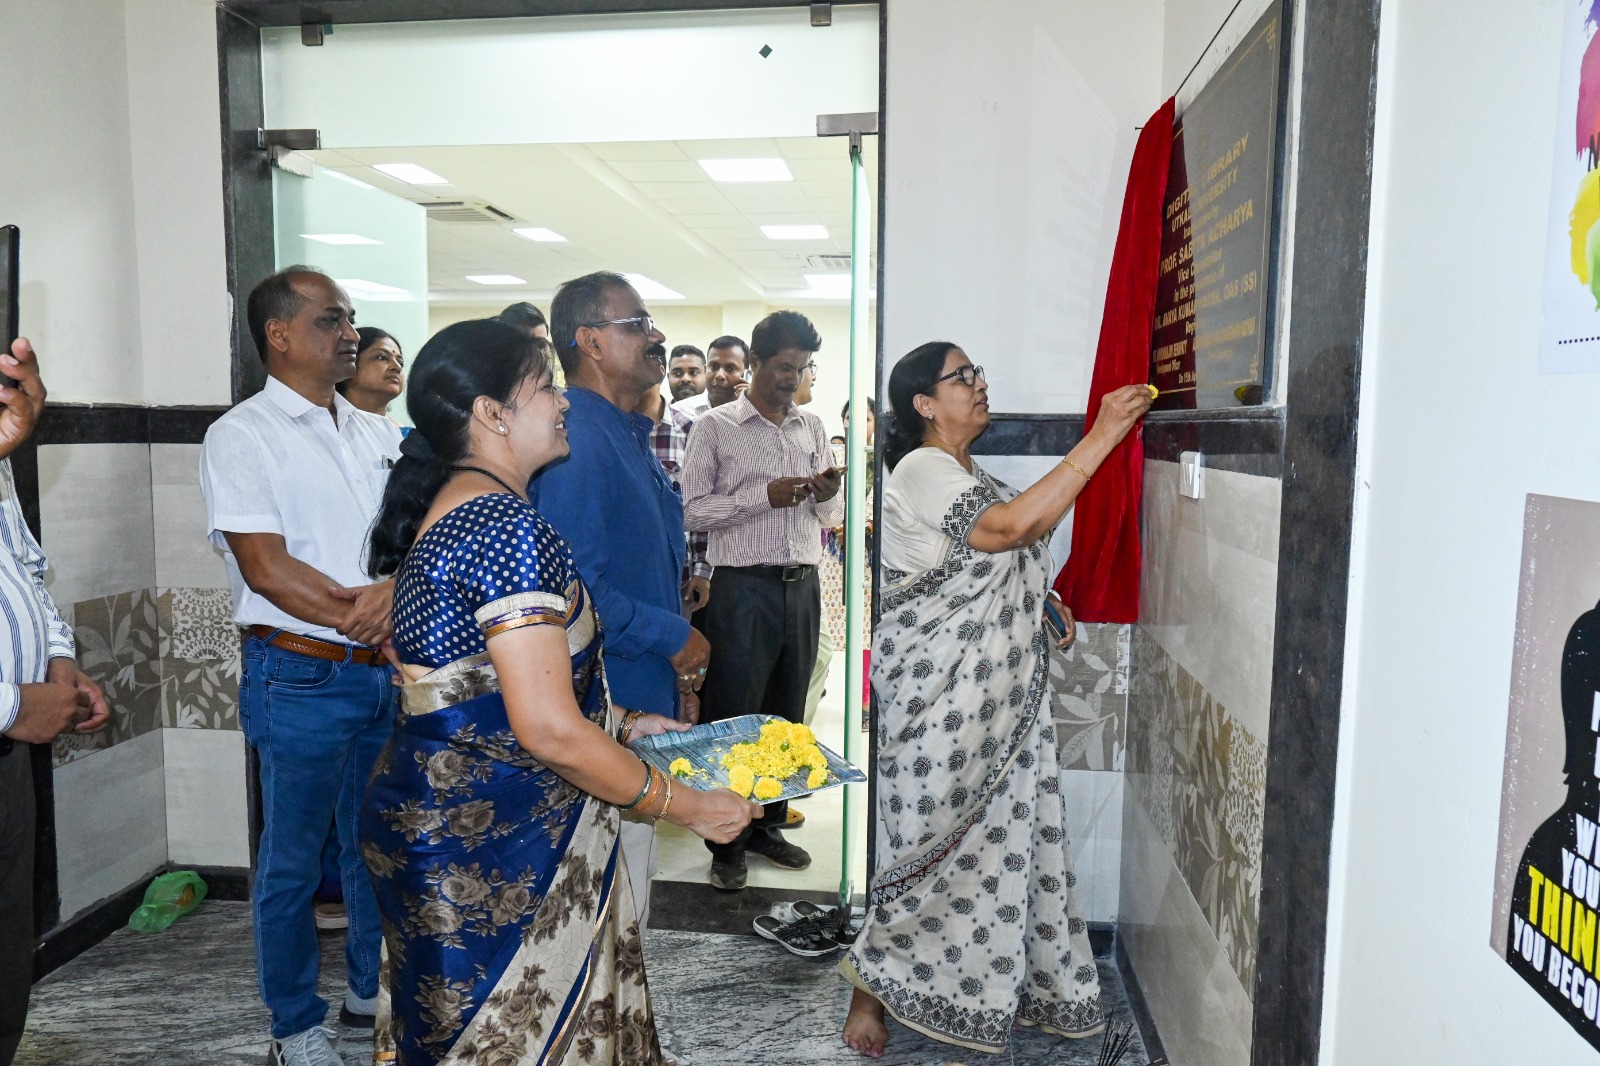 Utkal University In Bhubaneswar Gets Fully Automated Library & Digital Library